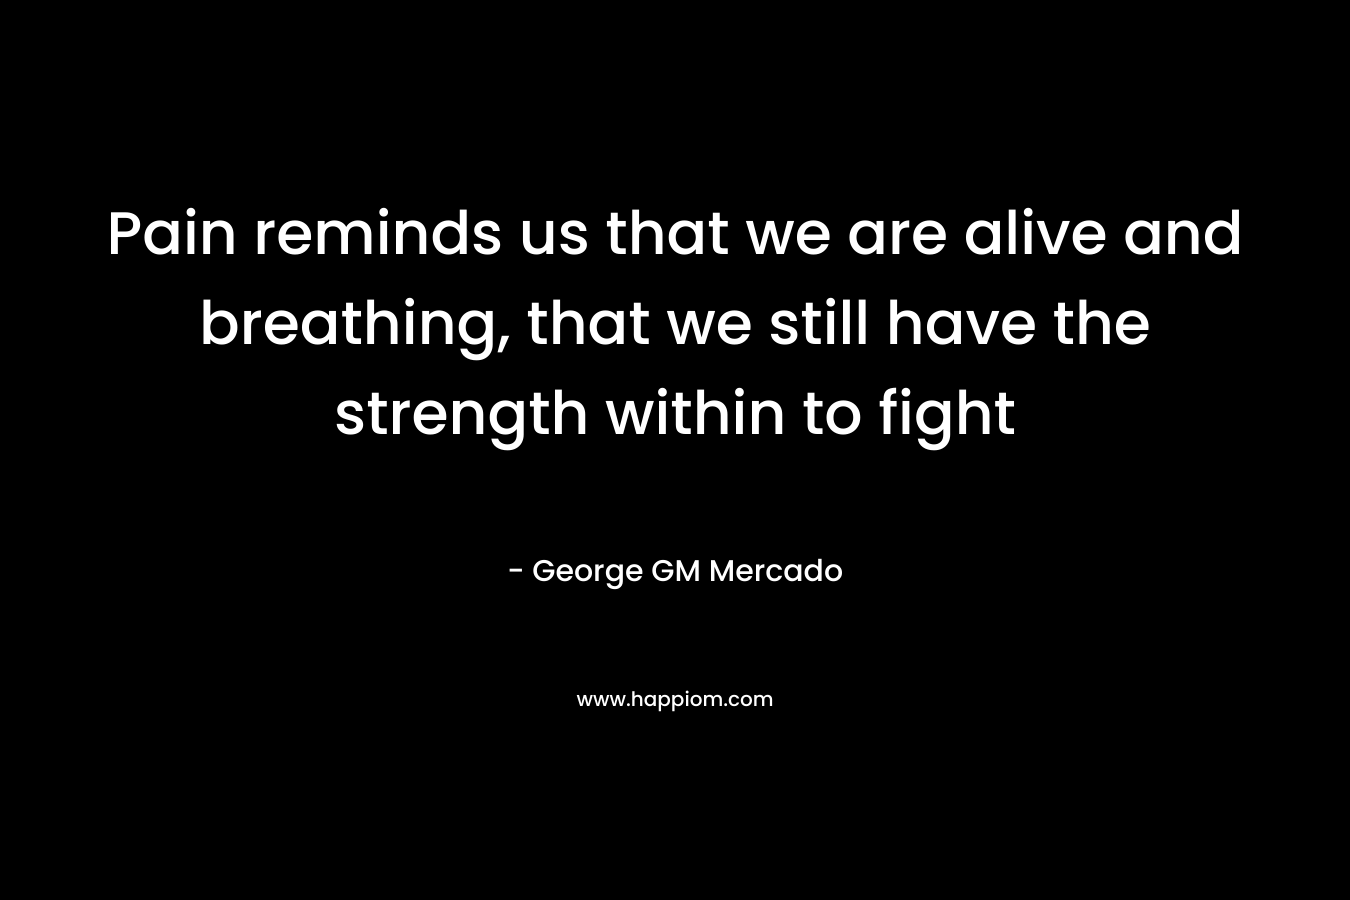 Pain reminds us that we are alive and breathing, that we still have the strength within to fight – George GM Mercado